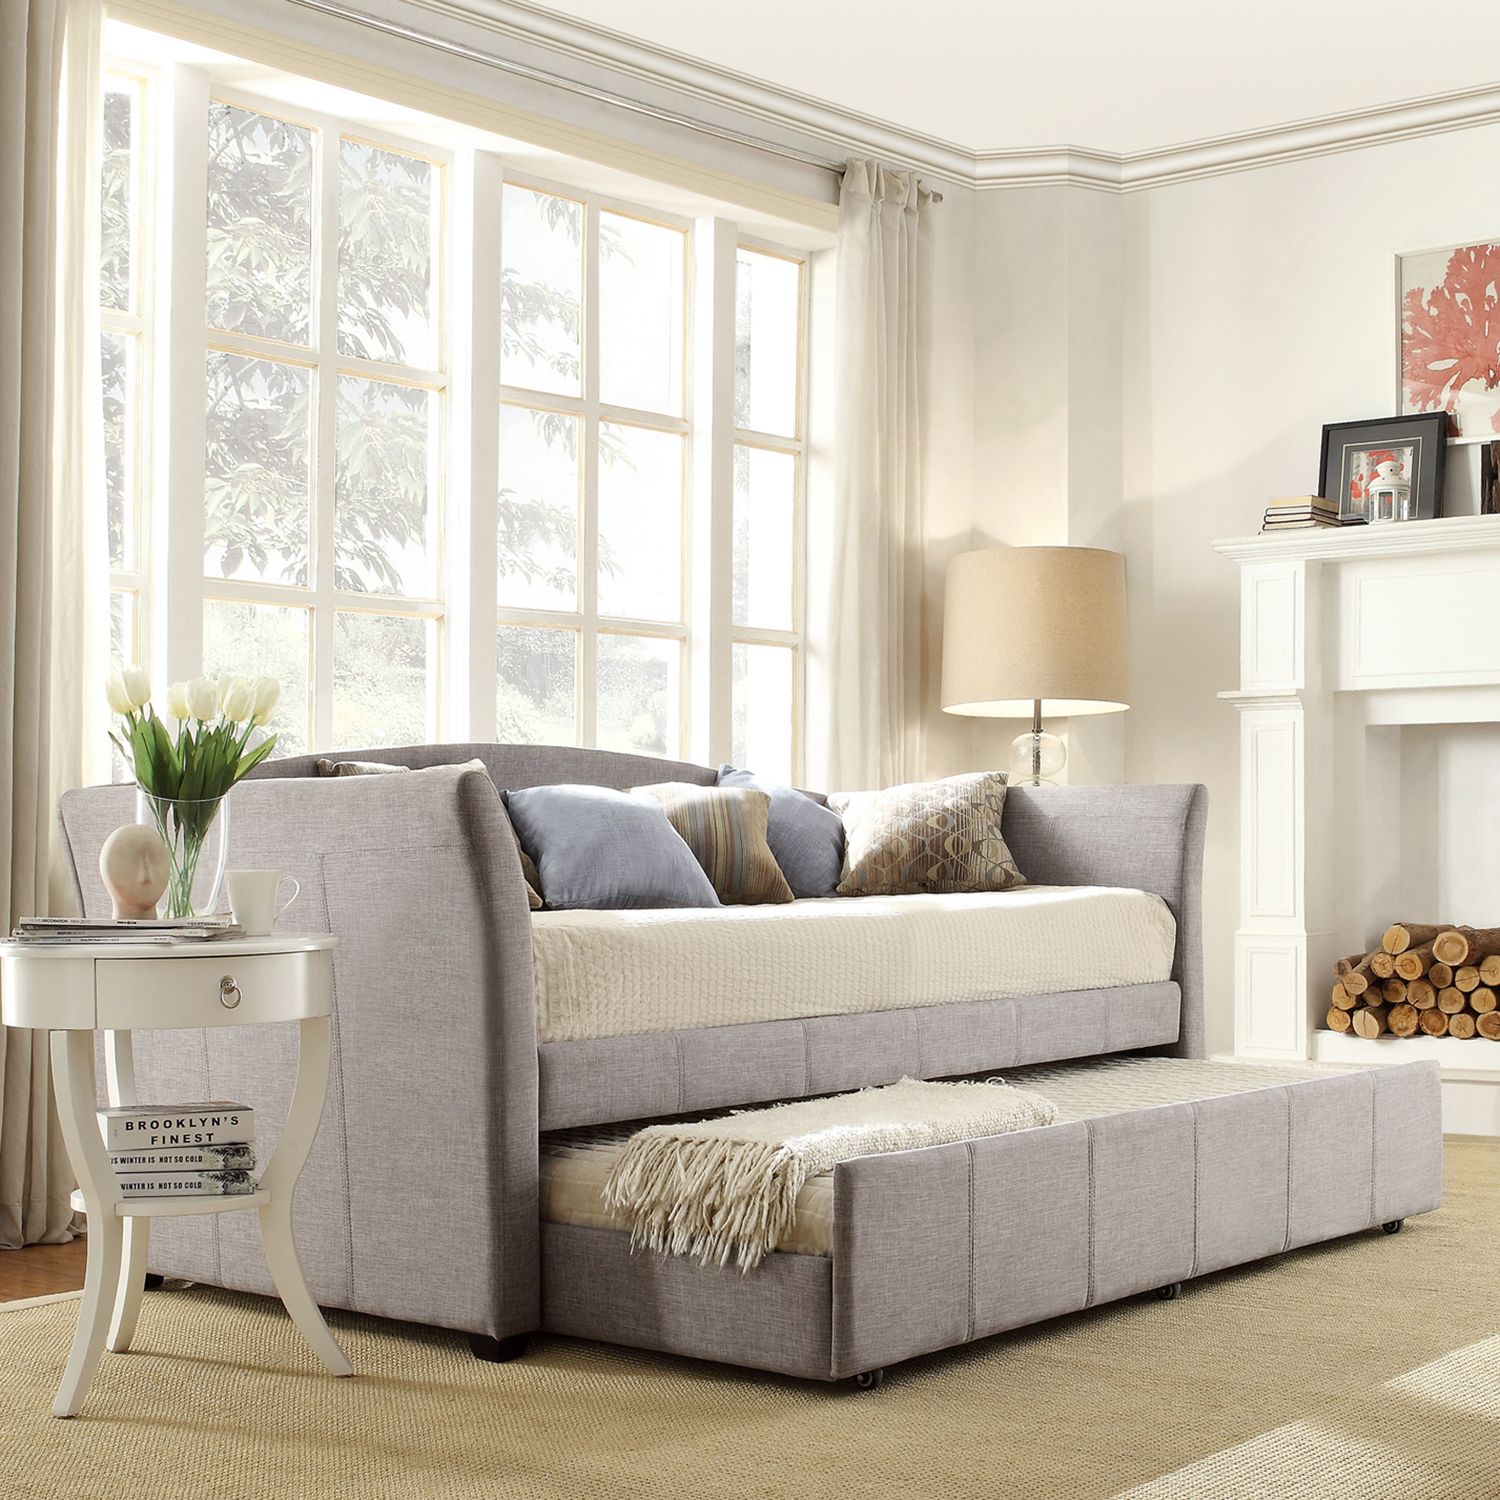 Image for HomeVance Myra Twin Daybed at Kohl's.